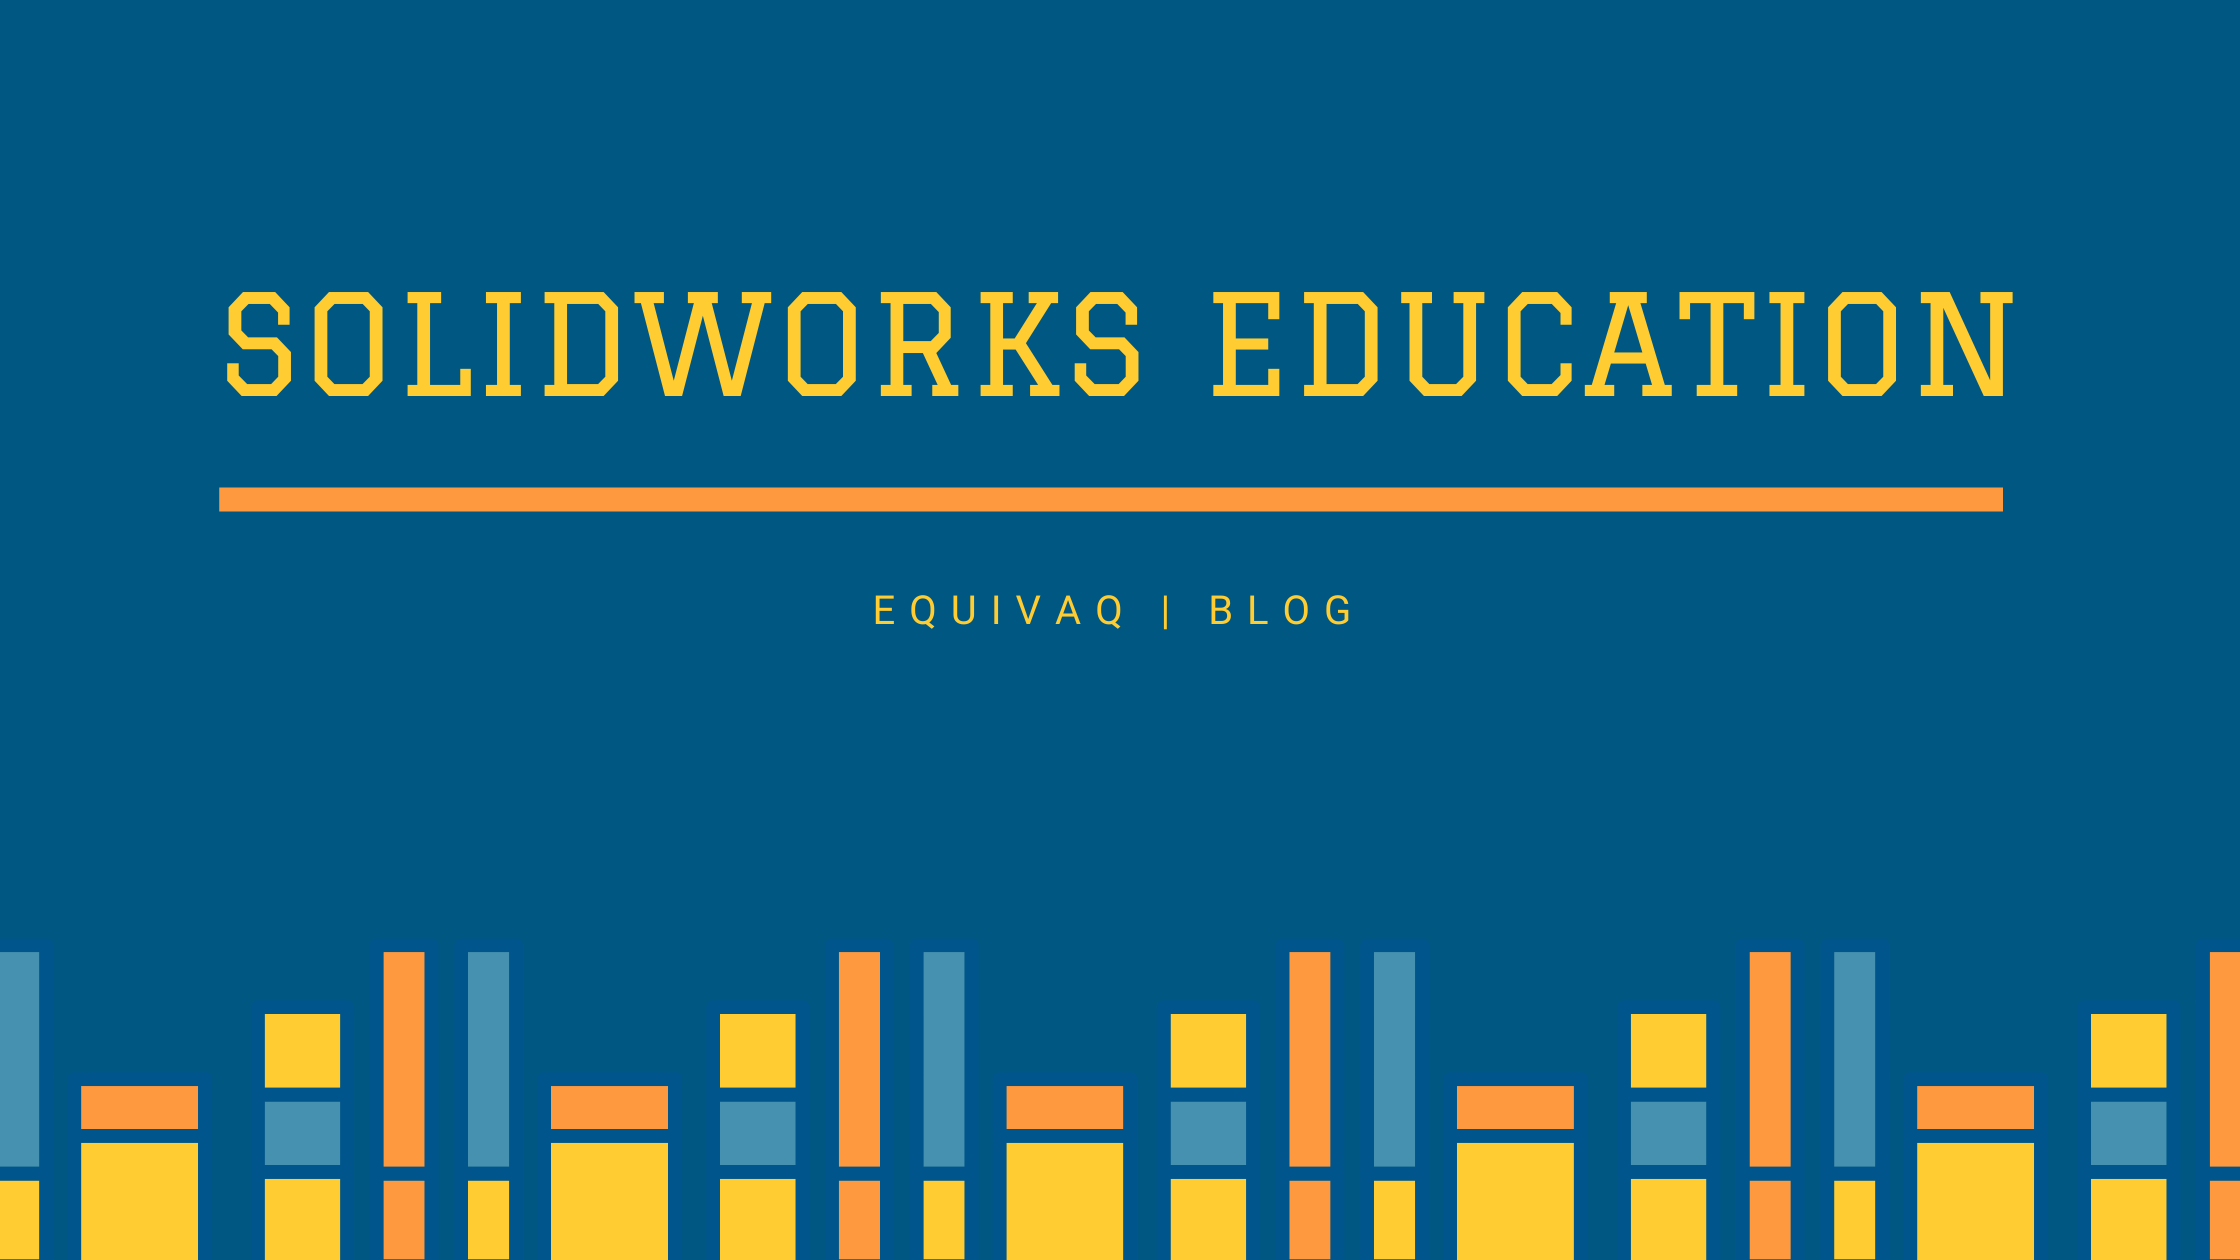 solidworks education, oklahoma state university, CEAT, solidworks